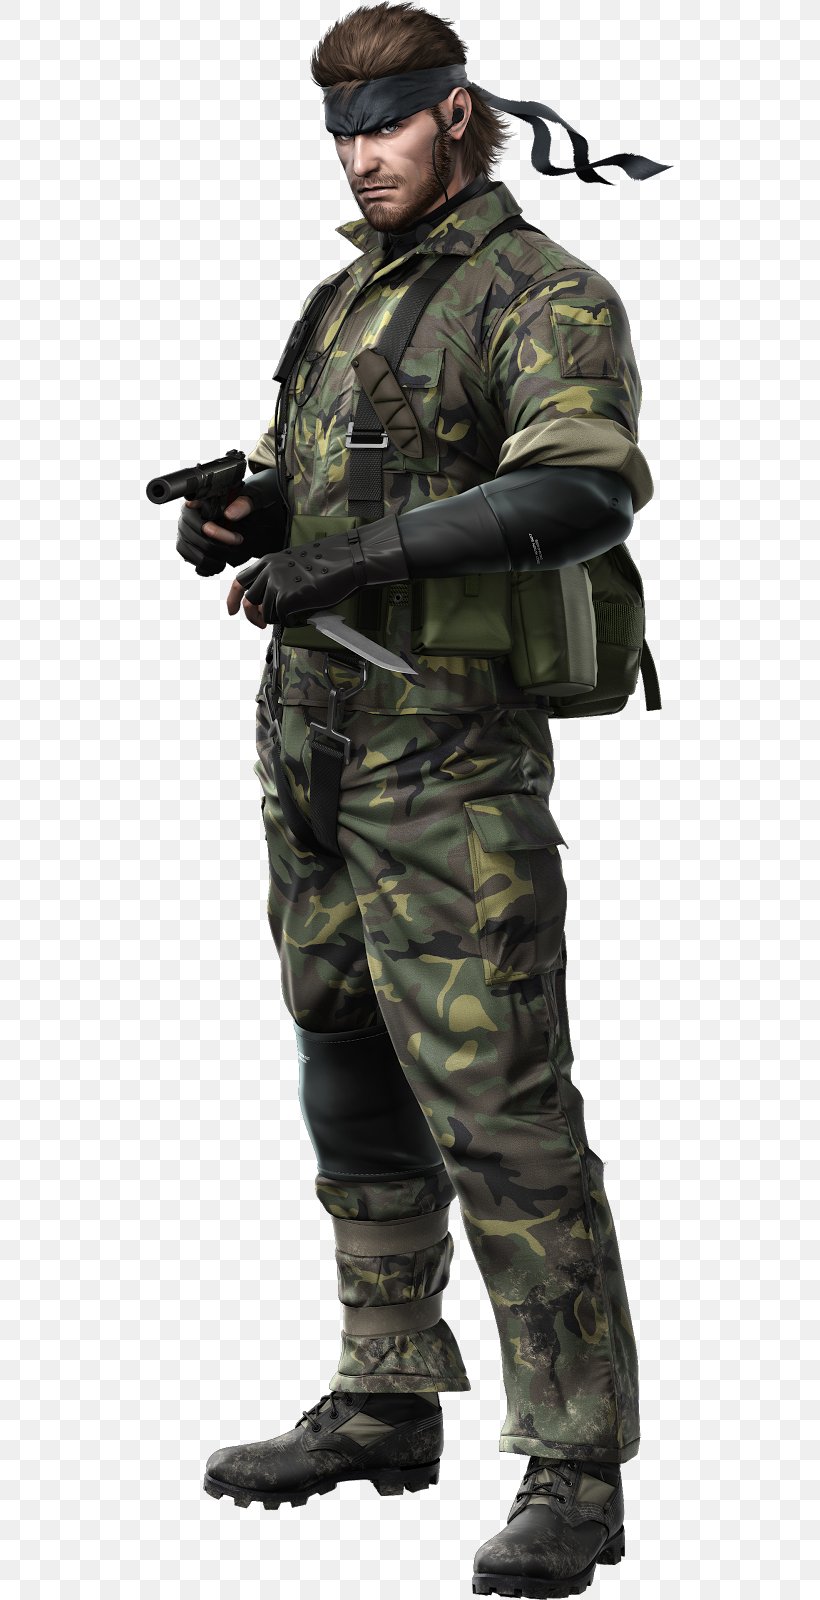 Metal Gear Solid 3: Snake Eater Metal Gear 2: Solid Snake Metal Gear Solid V: The Phantom Pain Metal Gear Solid: The Twin Snakes, PNG, 528x1600px, Metal Gear Solid 3 Snake Eater, Army, Big Boss, Camouflage, Infantry Download Free